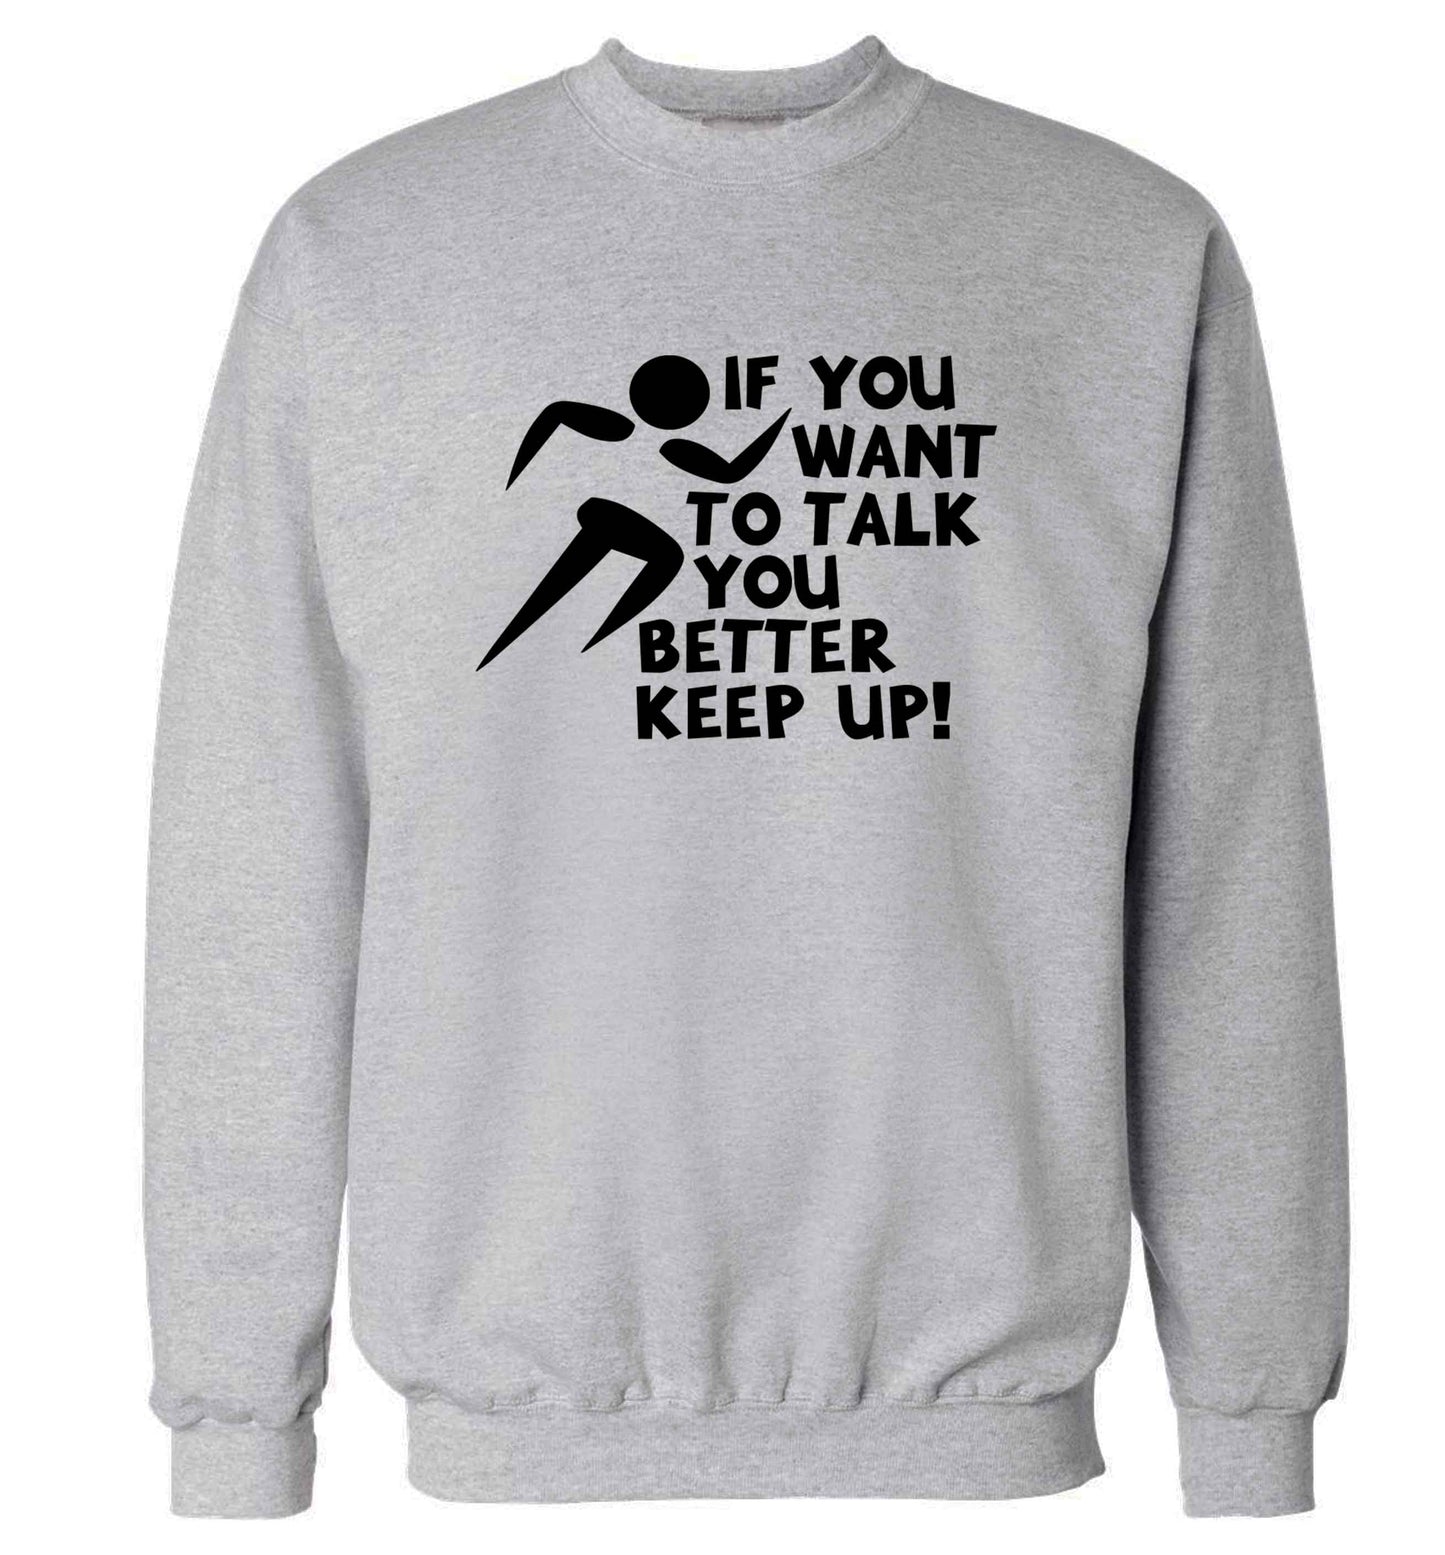 If you want to talk you better keep up! adult's unisex grey sweater 2XL